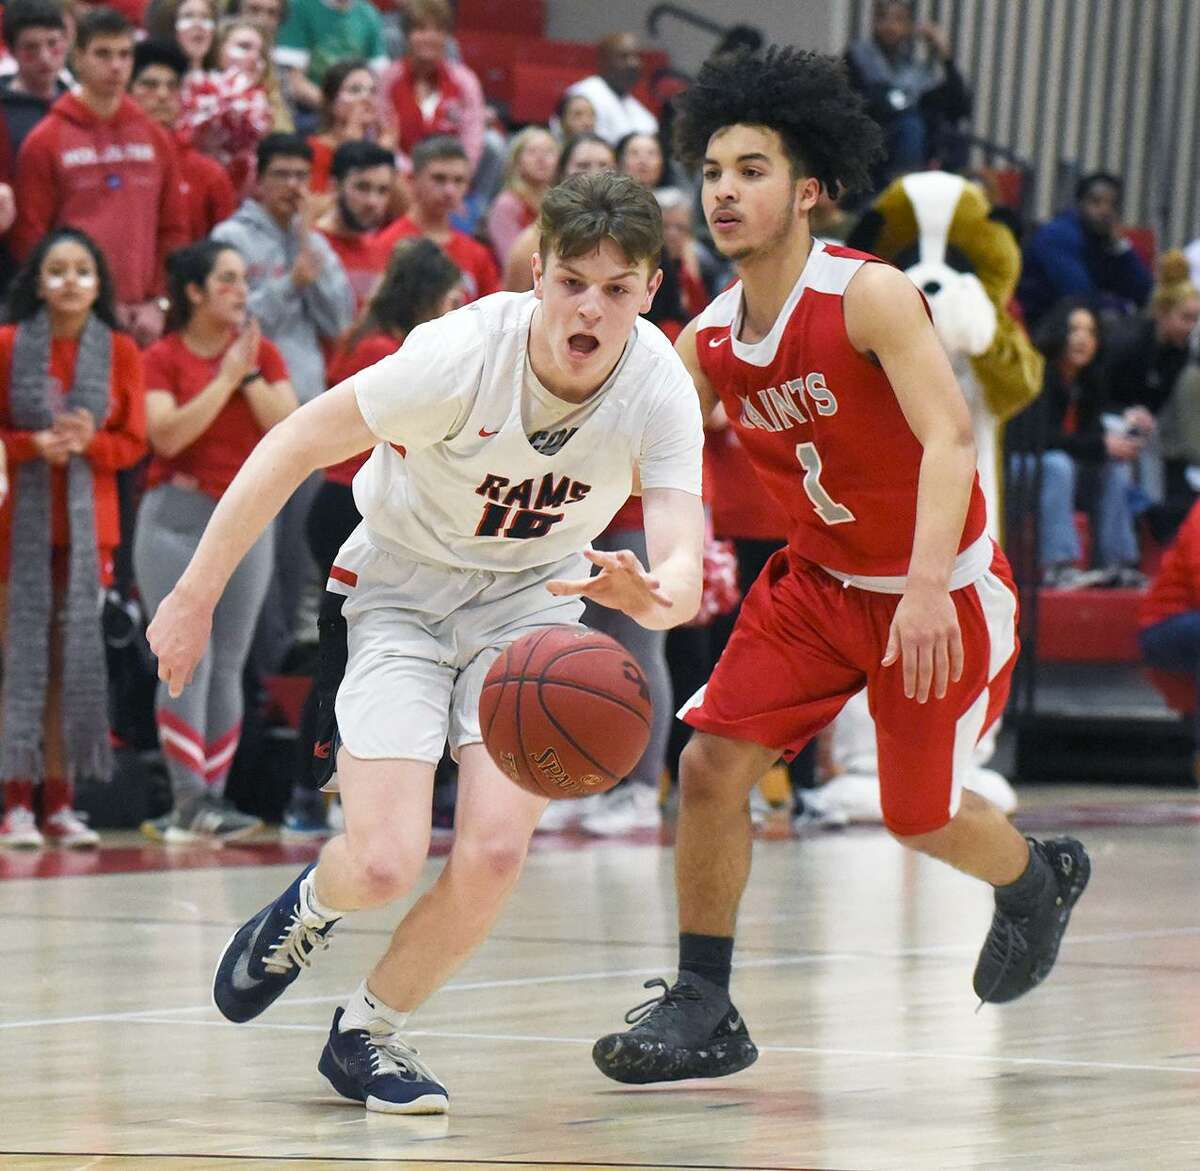 New Canaan’s Ryan McAleer (10) gets out in front of St. Bernard’s Frank Pacheco during a CIAC Division IV quarterfinal game at New Canaan High on Friday.